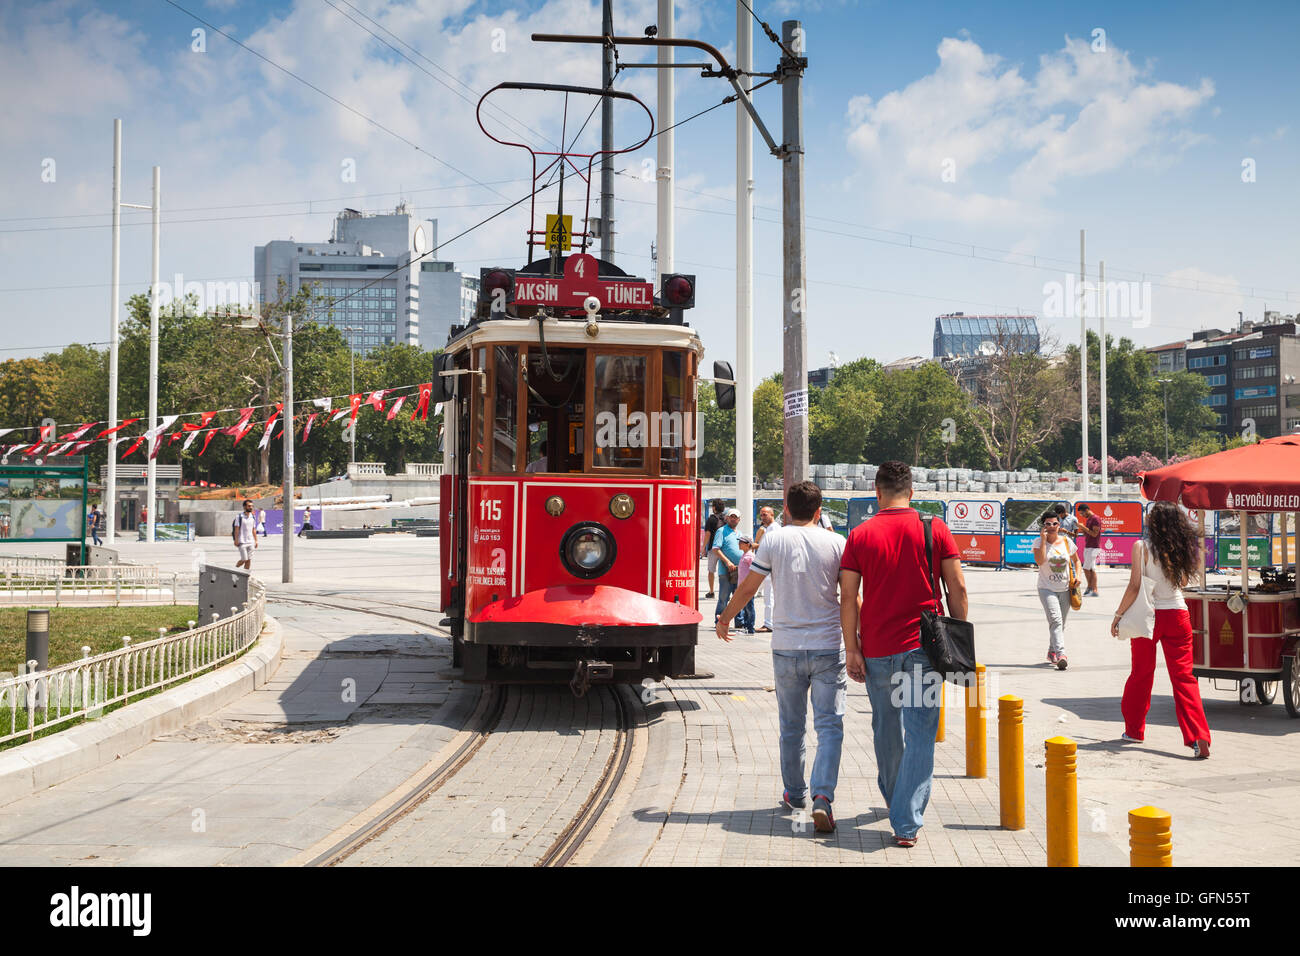 Istanbul, Turkey - July 1, 2016: Vintage red tram goes on Taksim square in Istanbul, ordinary people walk nearby Stock Photo